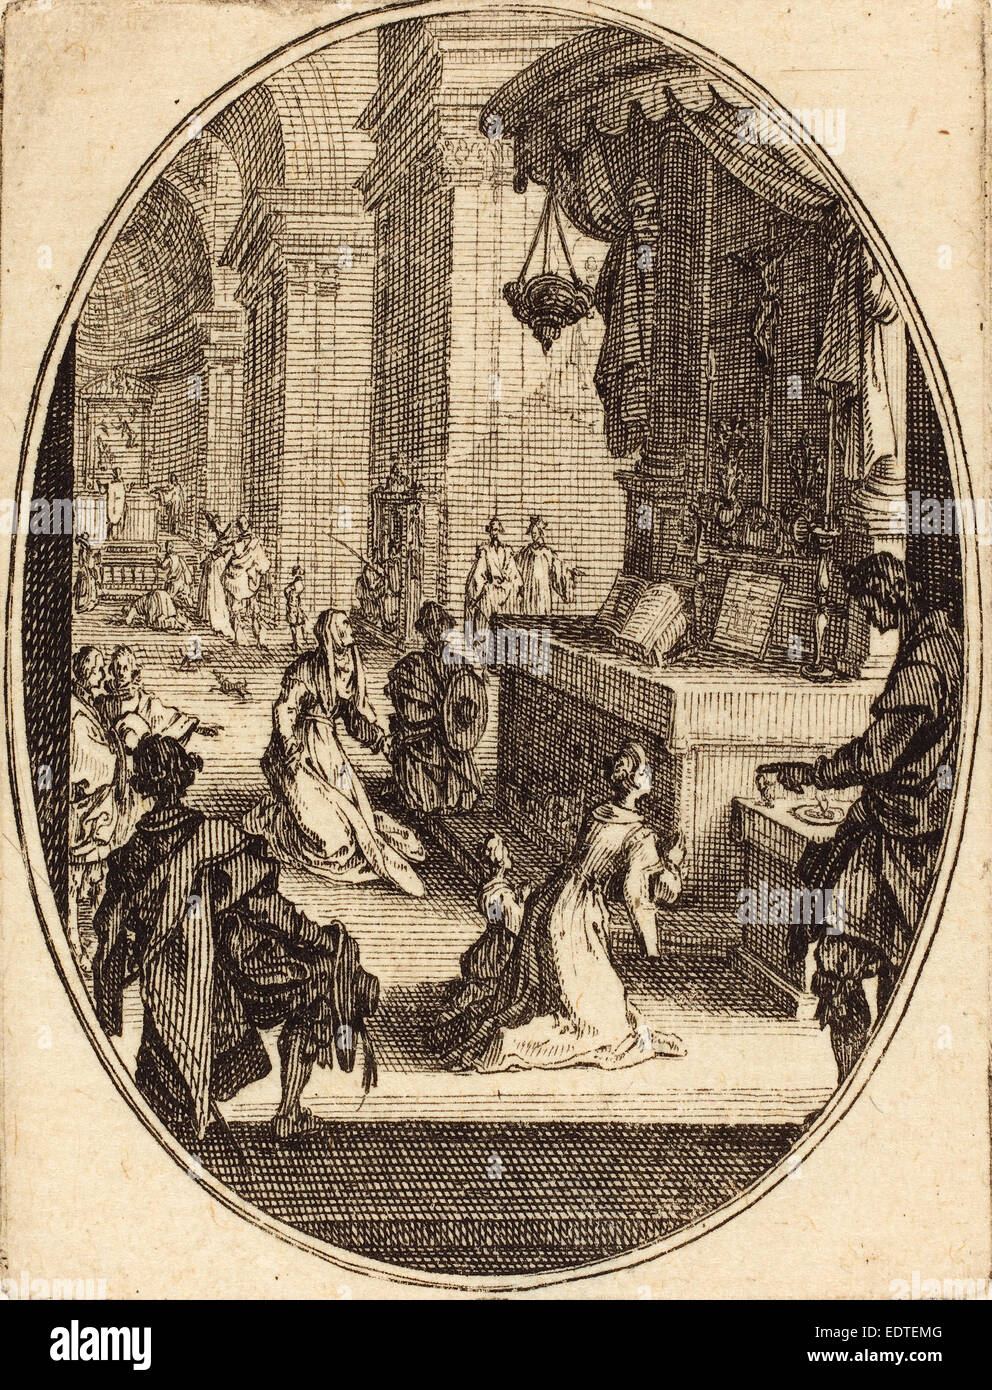 Jacques Callot (French, 1592 - 1635), The Cult of God, probably 1627, etching Stock Photo